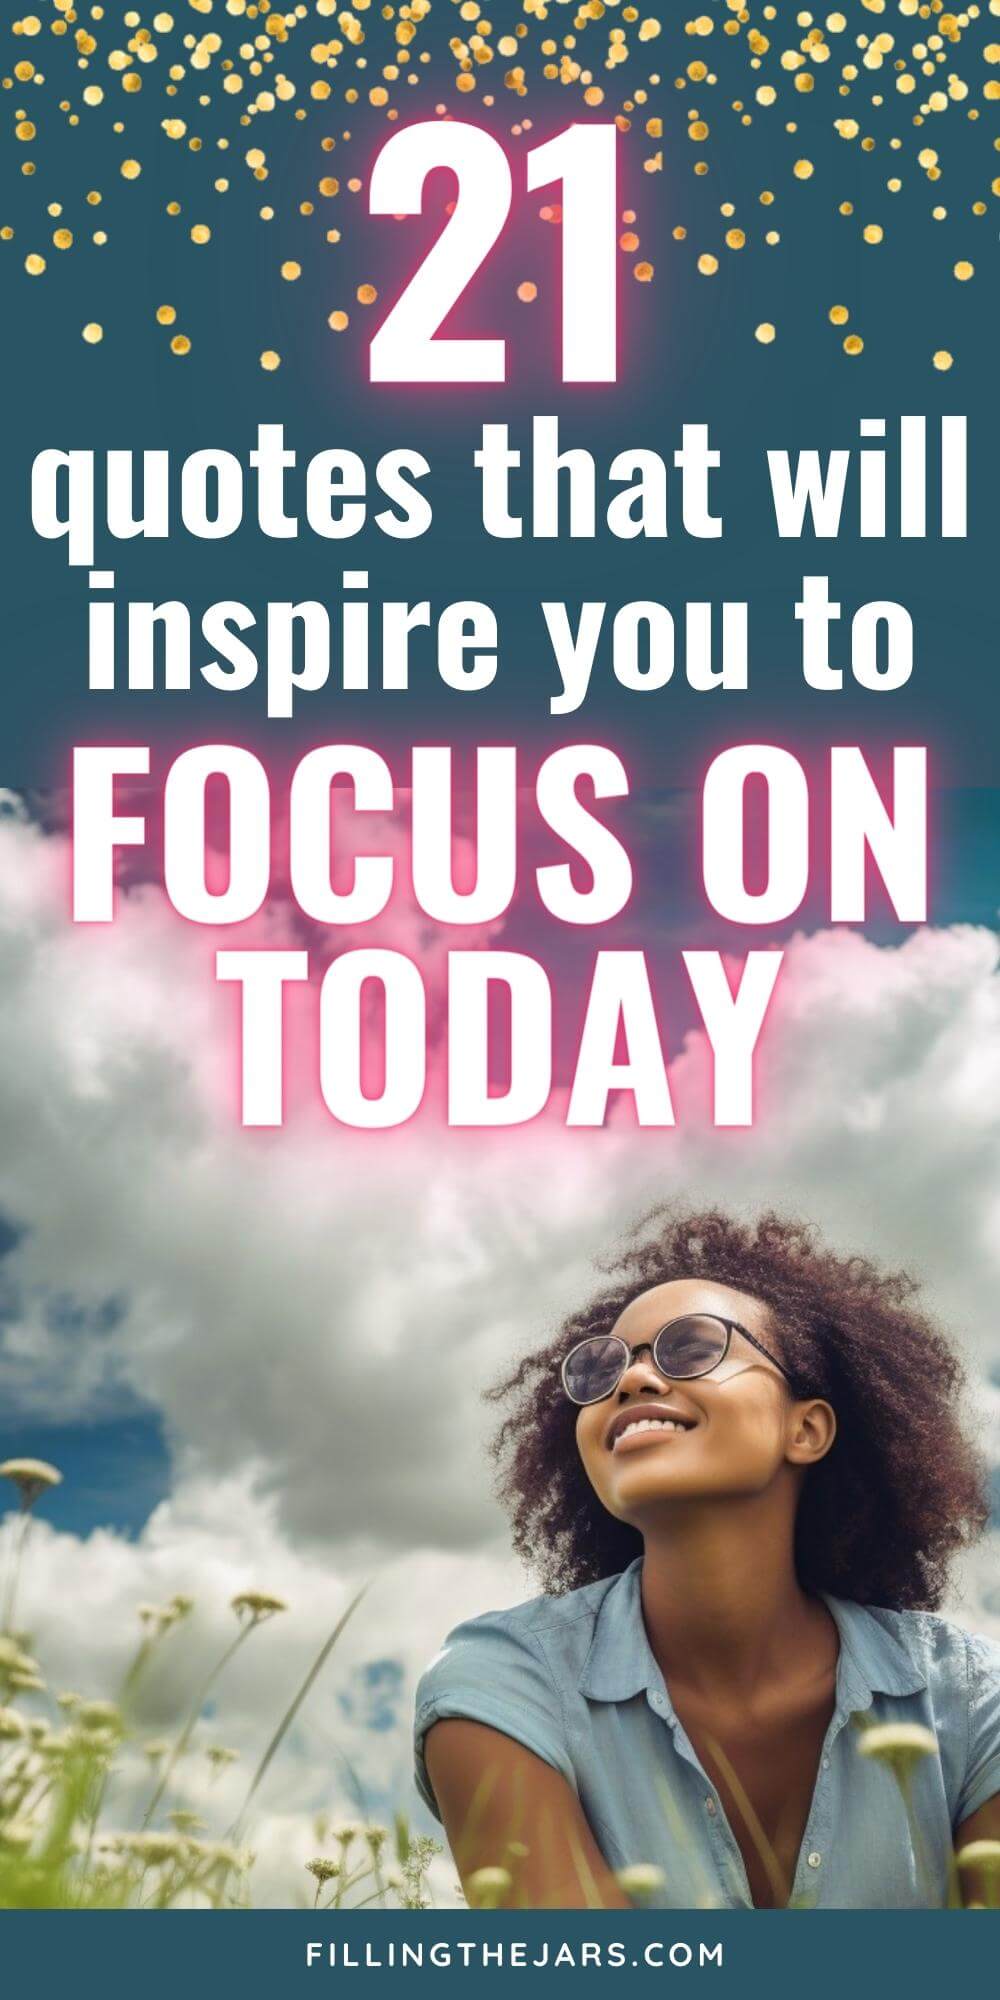 Text 21 quotes that will inspire you to focus on today over smiling black woman sitting in meadow on sunny and cloudy day.